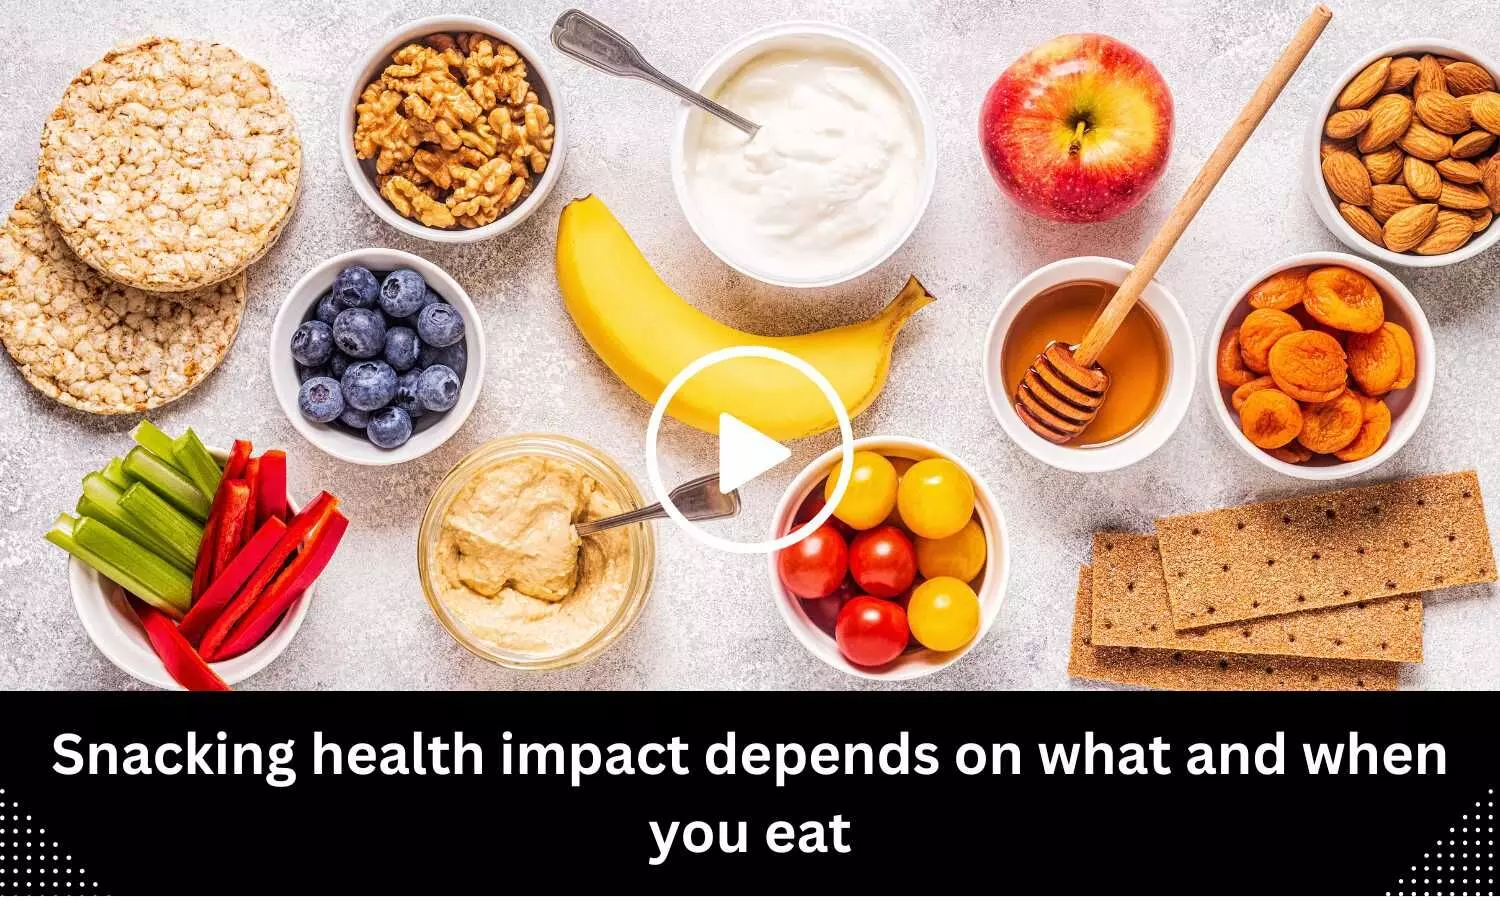 Snacking health impact depends on what and when you eat